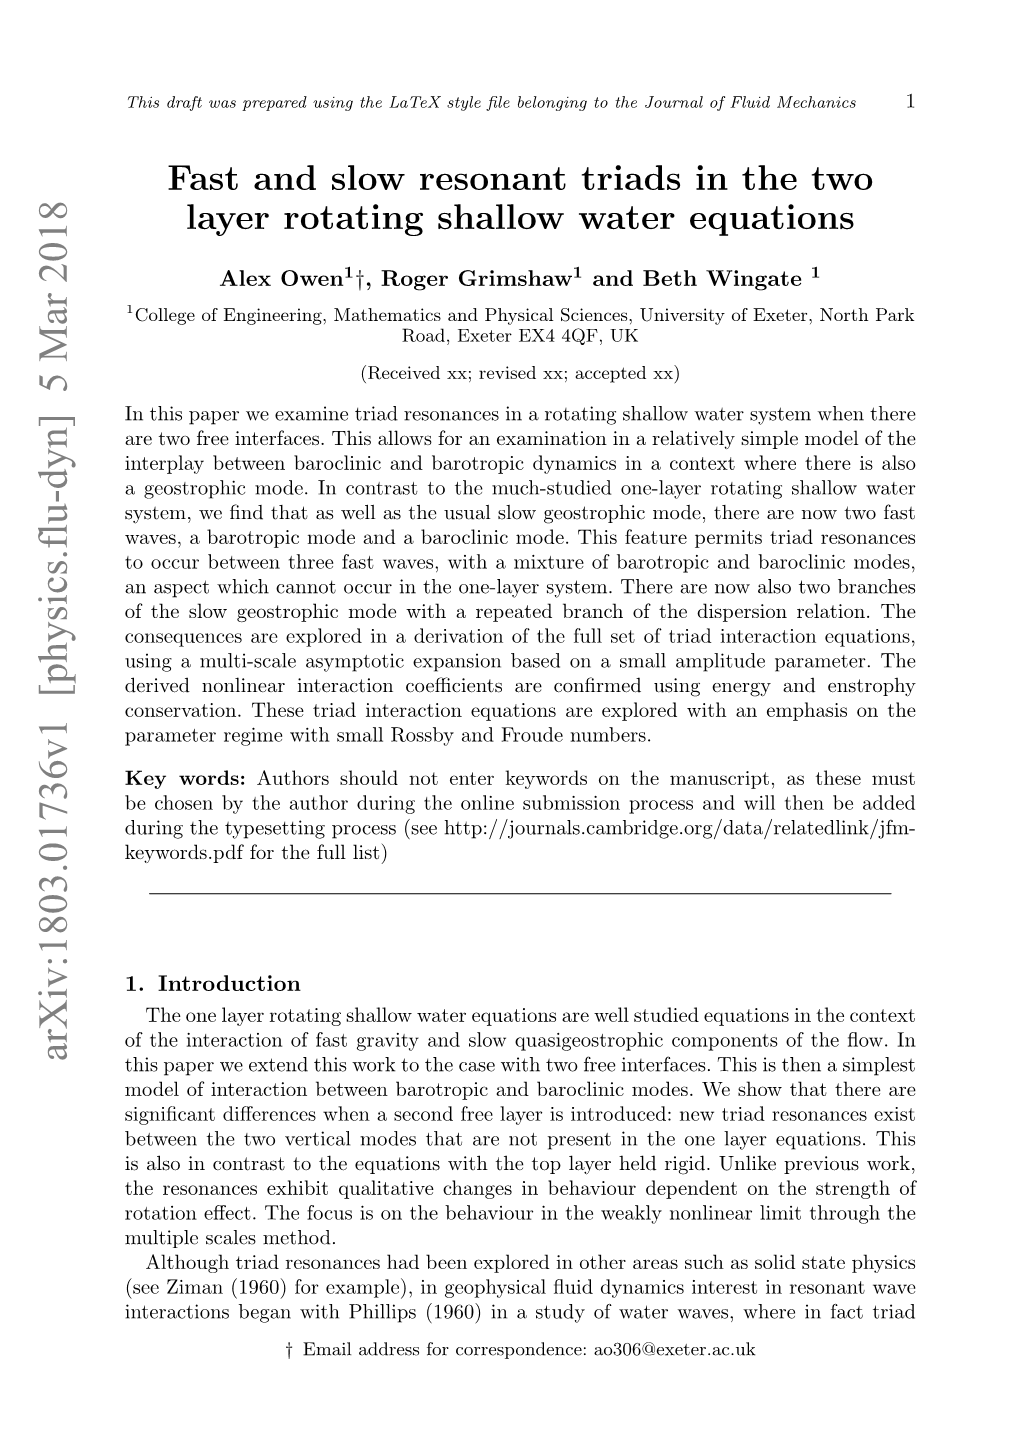 Fast and Slow Resonant Triads in the Two Layer Rotating Shallow Water Equations